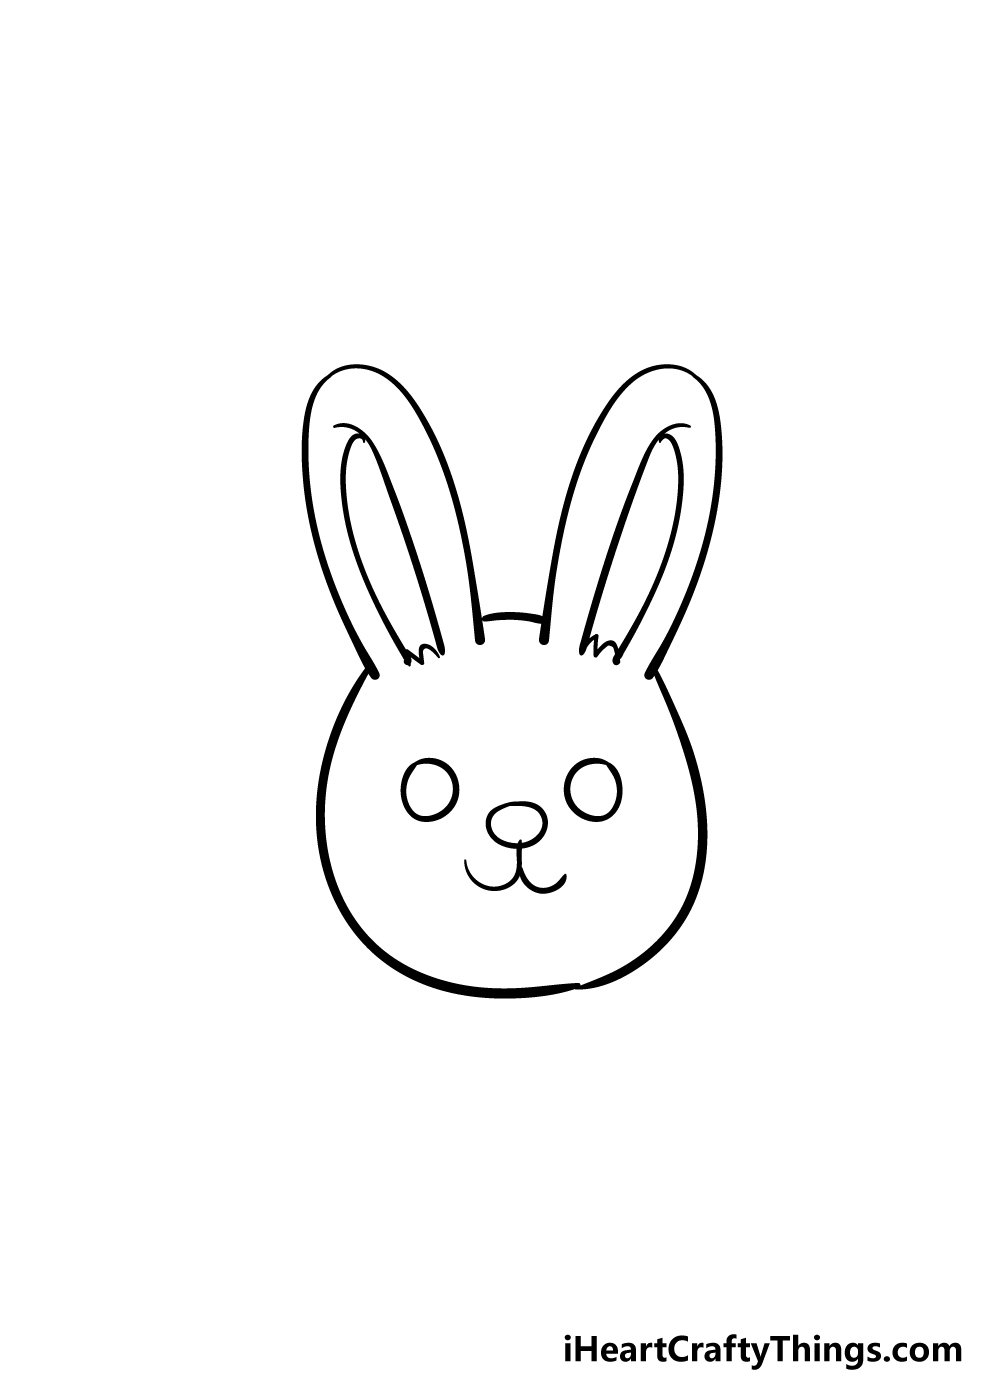 bunny face drawing step 4